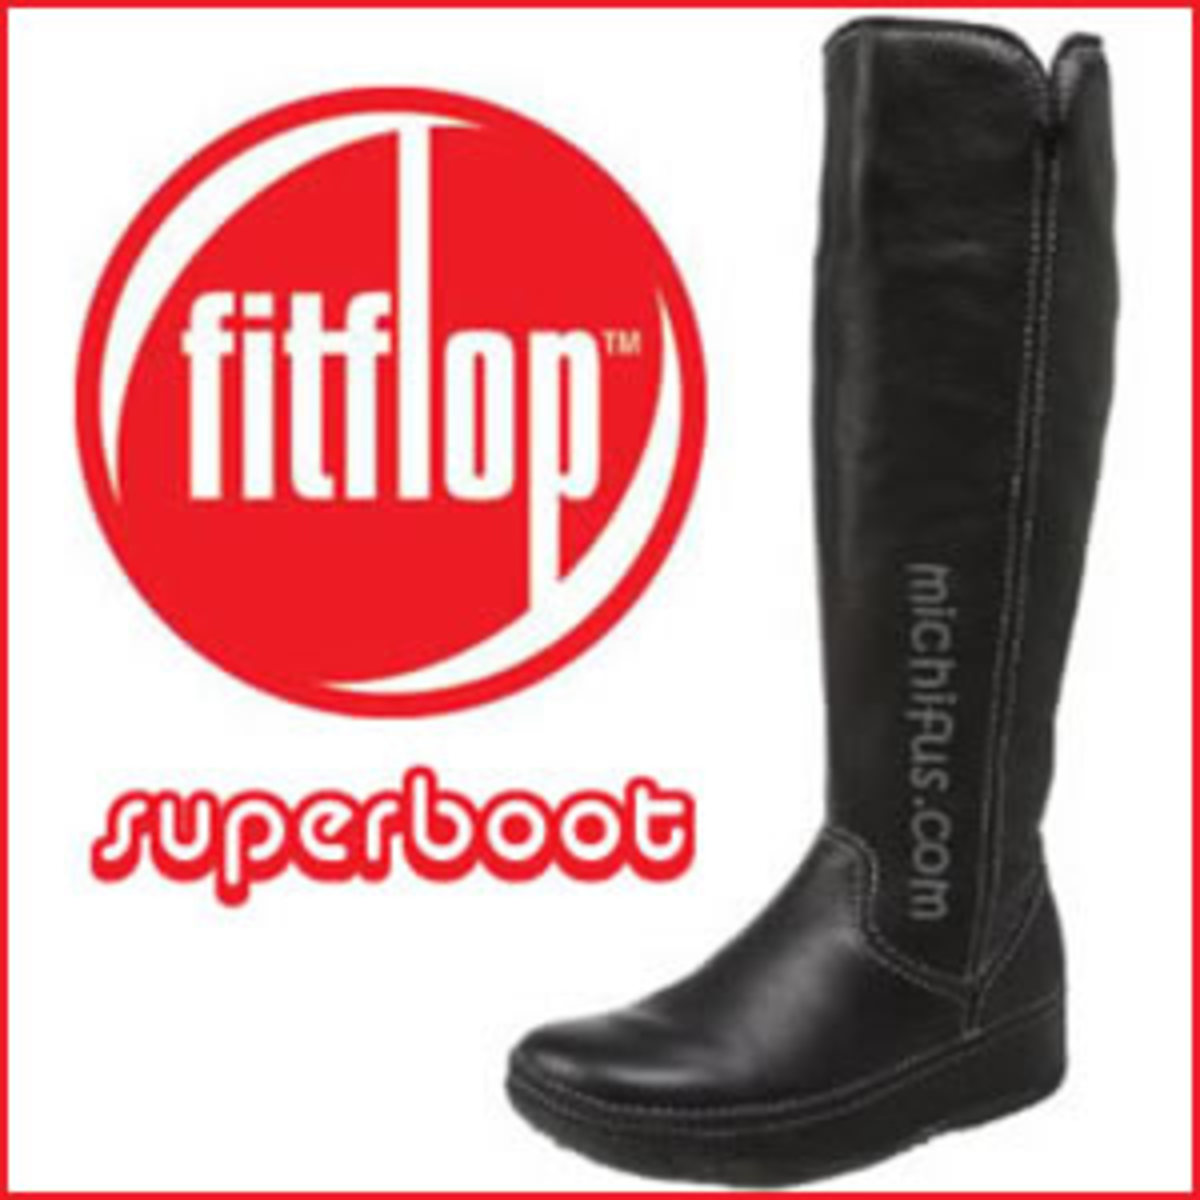 FitFlop Superboots